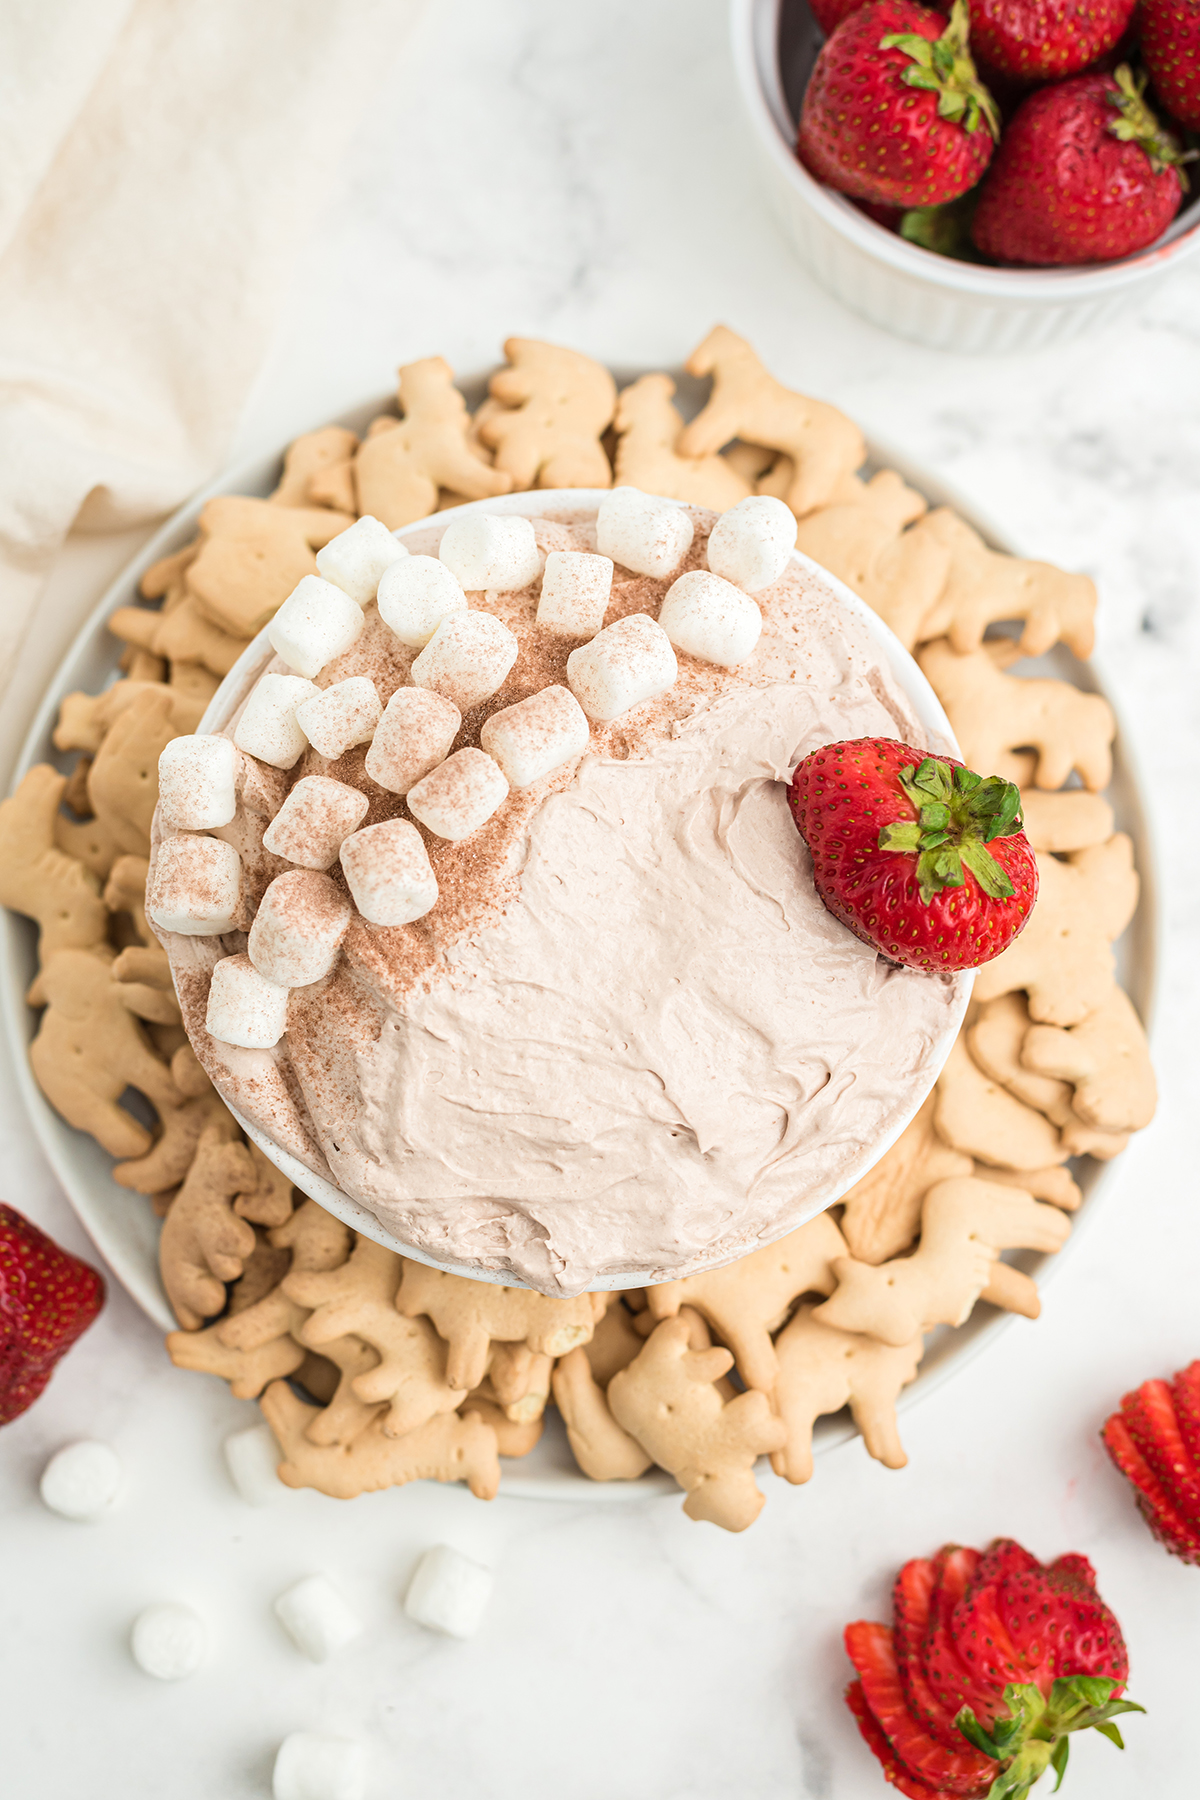 Hot chocolate dip top view photo on a white counter with strawberries, crackers, and mini marshmallows.